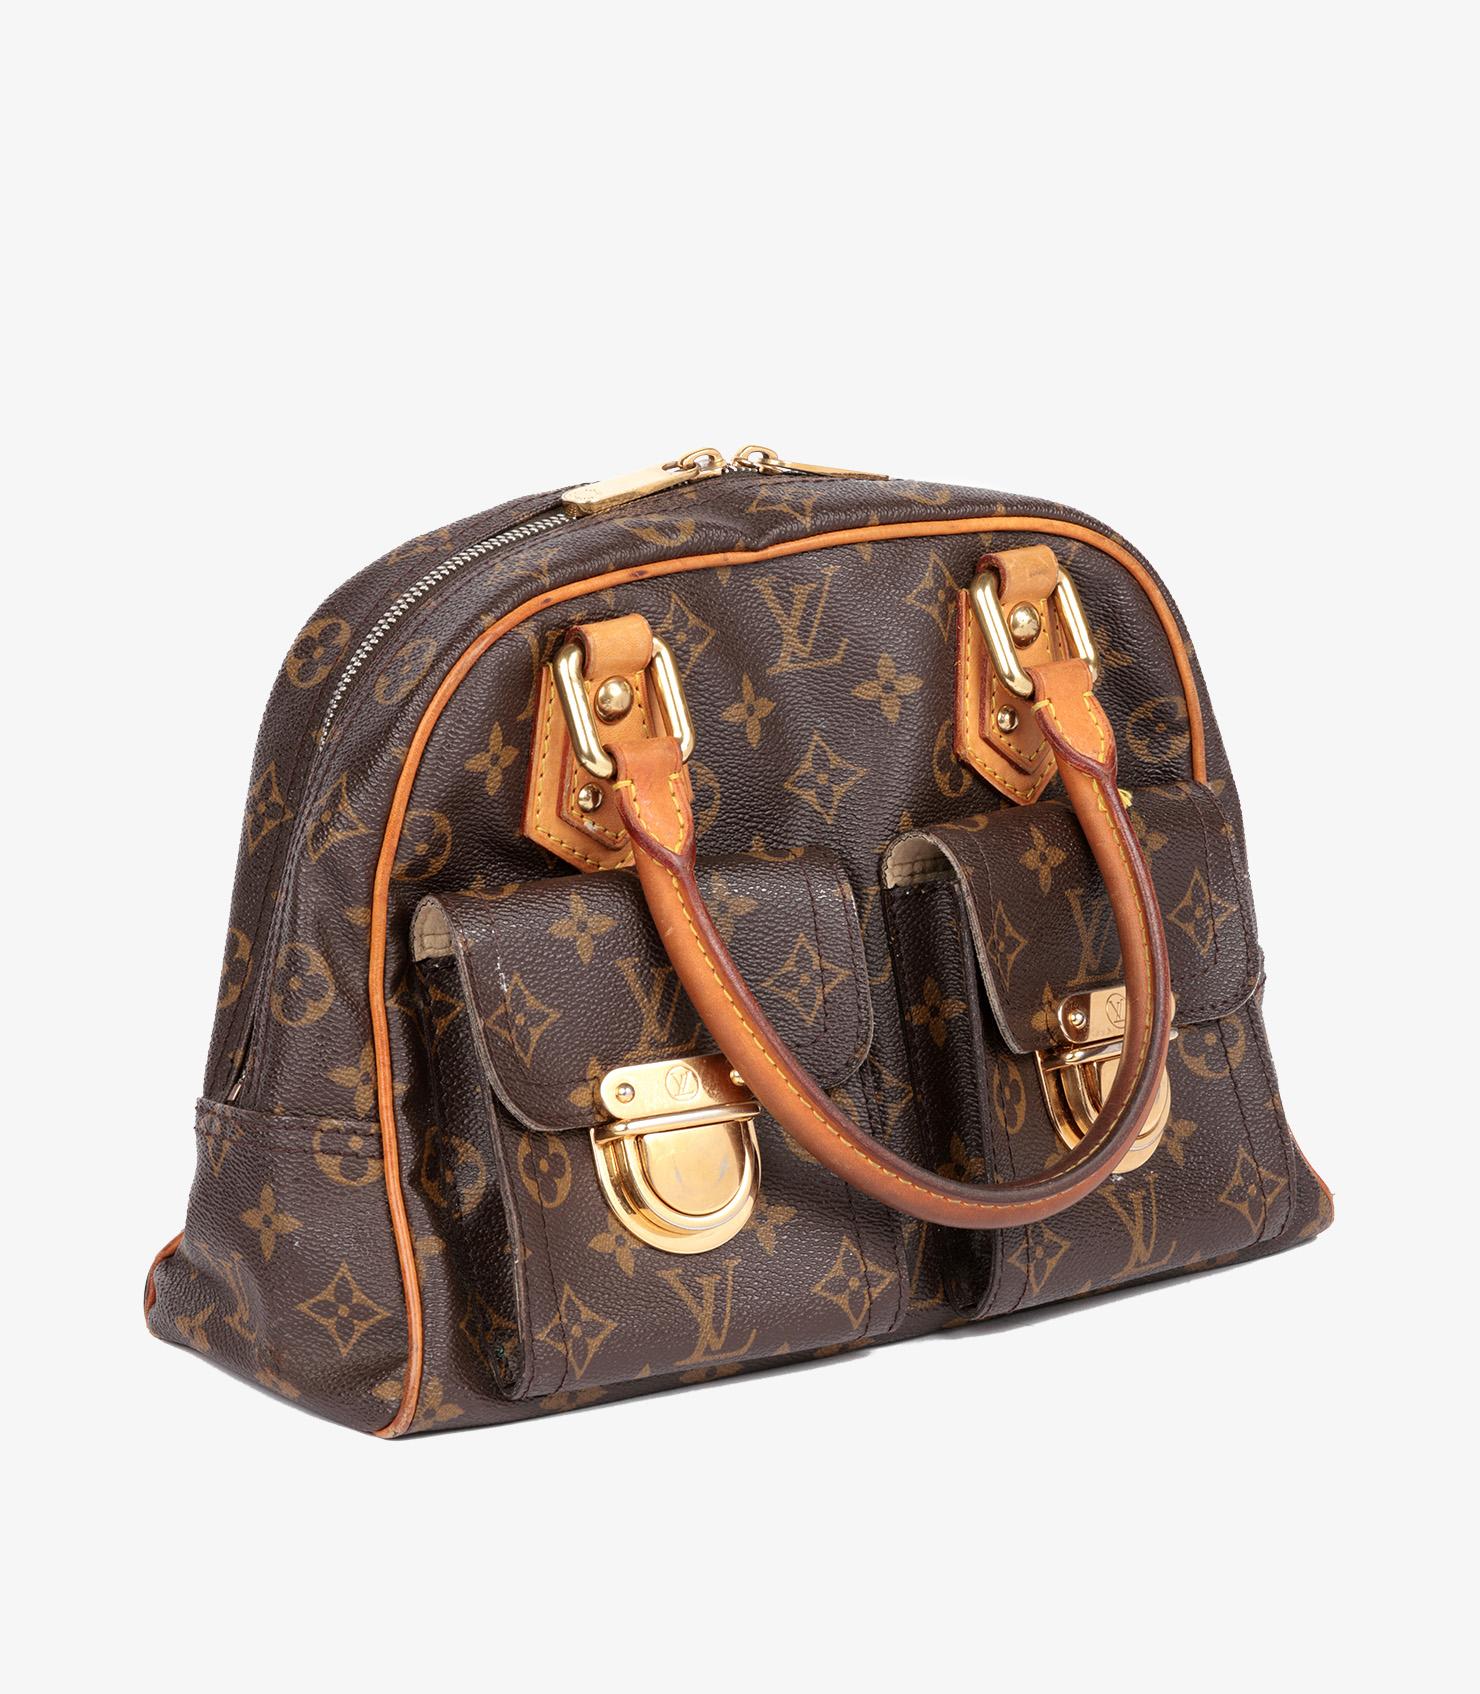 Louis Vuitton Brown Monogram Coated Canvas & Vachetta Leather Manhattan PM

Brand- Louis Vuitton
Model- Manhattan PM
Product Type- Tote
Serial Number- TH****
Age- Circa 2005
Colour- Brown
Hardware- Golden Brass
Material(s)- Coated Canvas, Vachetta